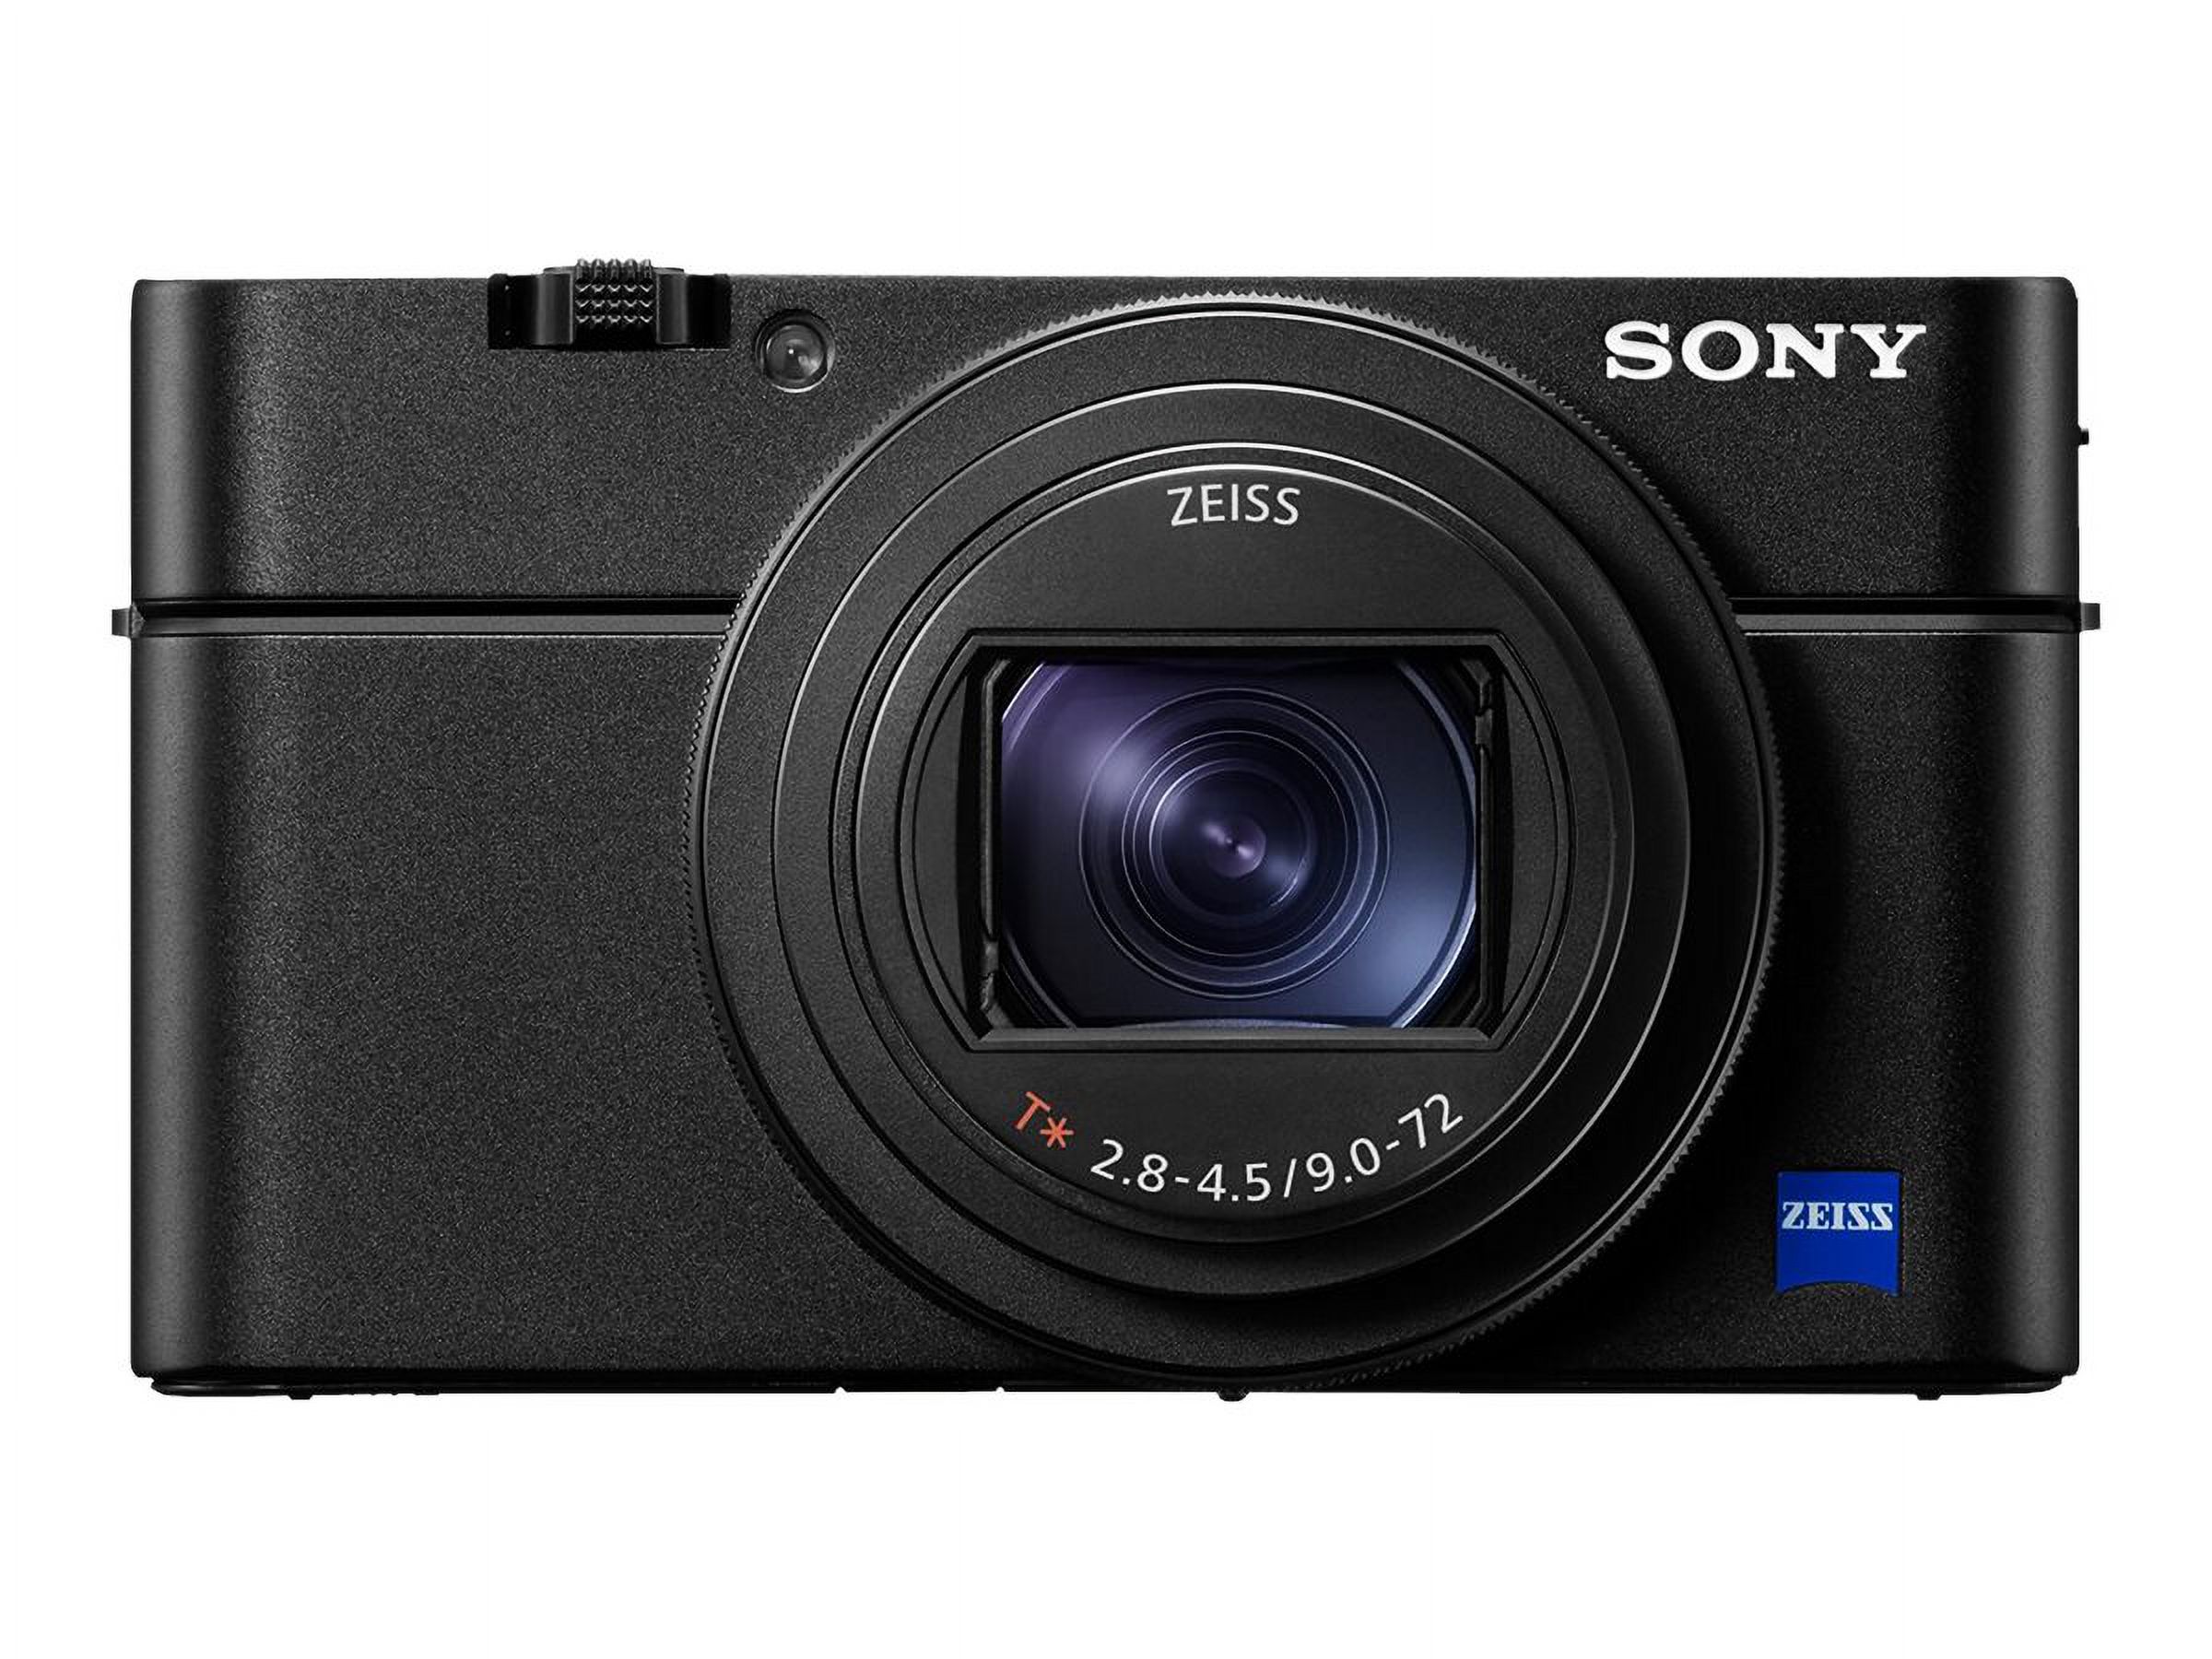 Sony Cyber-shot DSC-RX100 VII - Digital camera - compact - 20.1 MP - 4K / 30 fps - 8x optical zoom - ZEISS - Wi-Fi, NFC, Bluetooth - black - with Sony VCT-SGR1 Shooting Grip - image 2 of 15